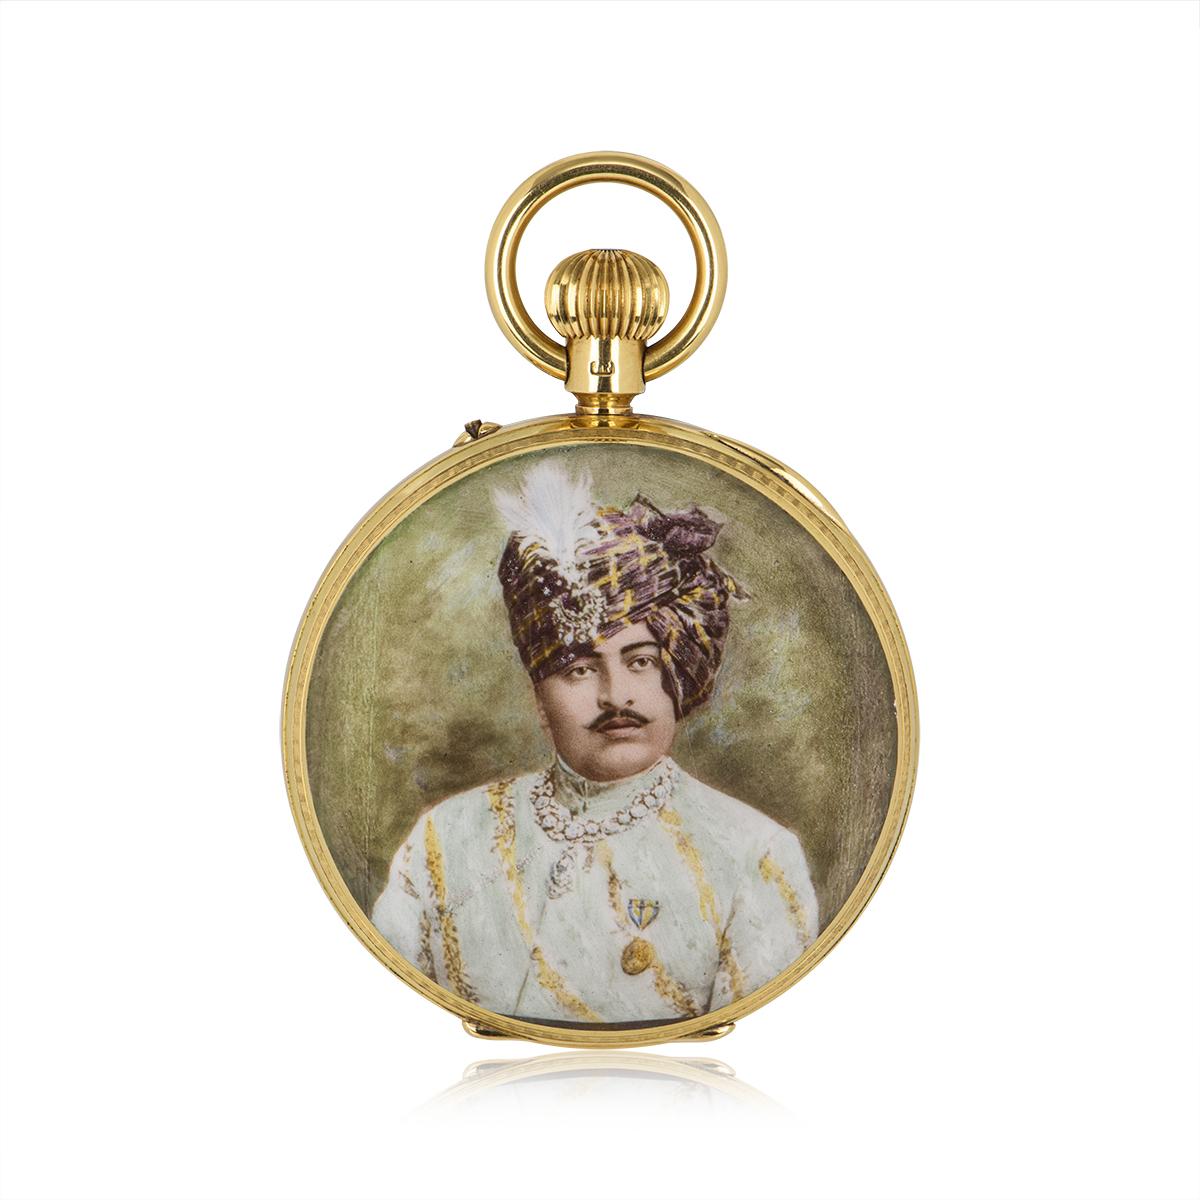 Men's Rotherhams 18kt Gold Open Face PocketWatch with an Enamel Portrait of a Maharaja